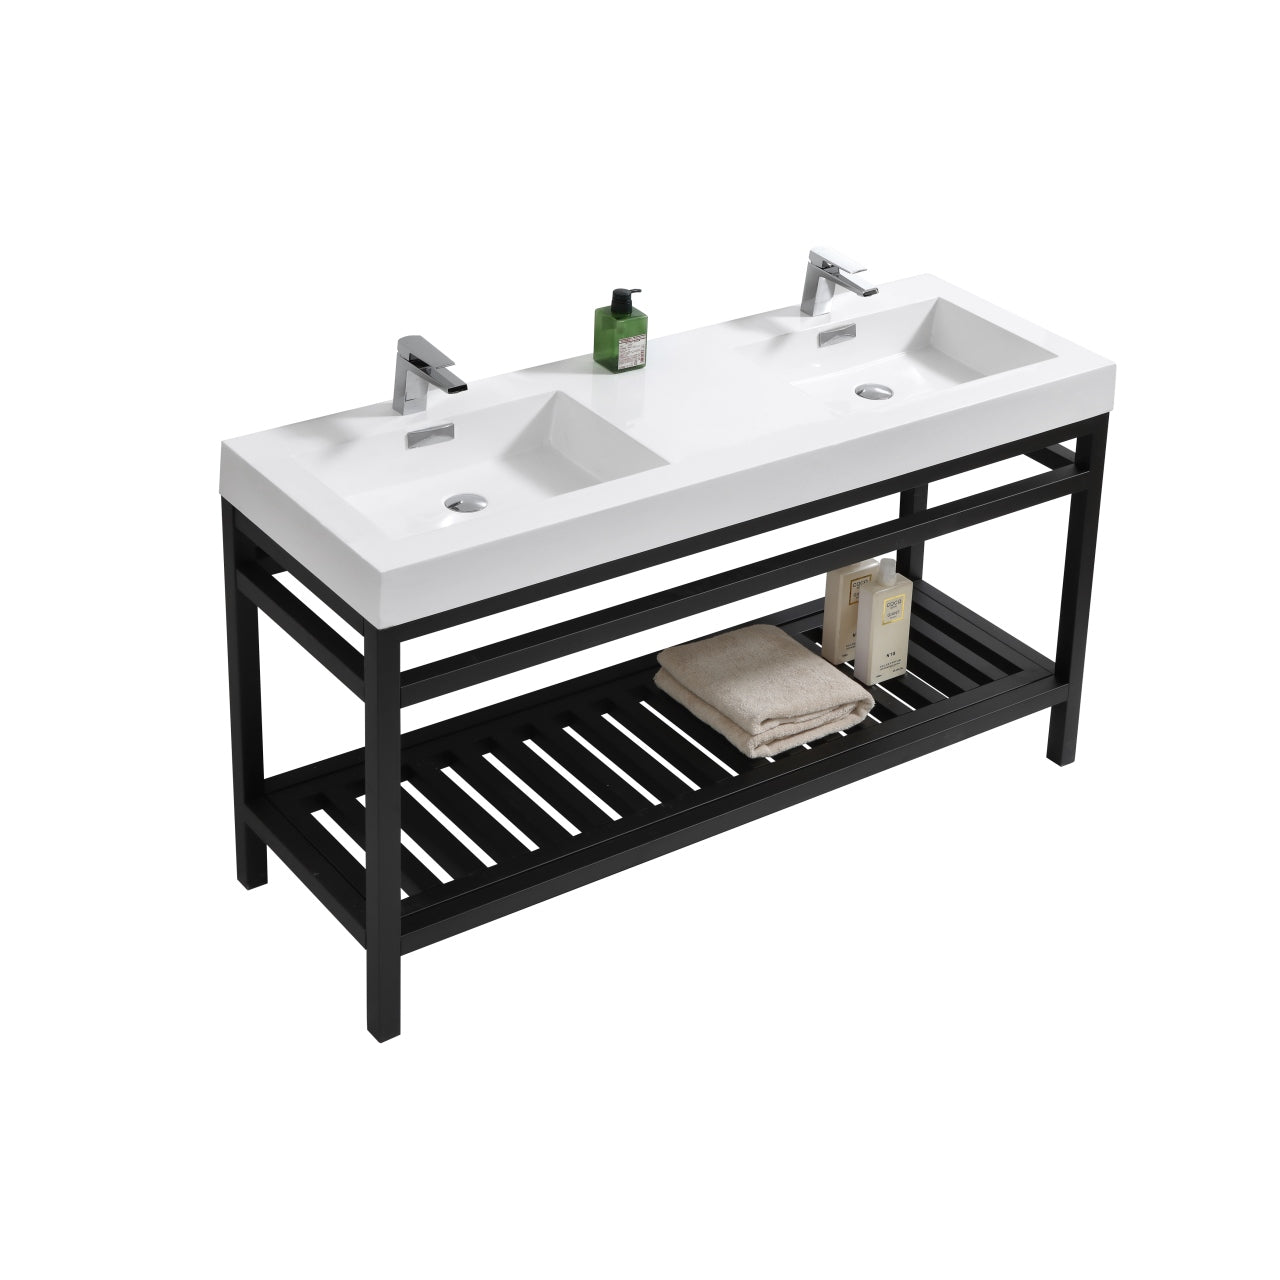 Cisco 60″ Double Sink Stainless Steel Console w/ White Acrylic Sink – Matte Black